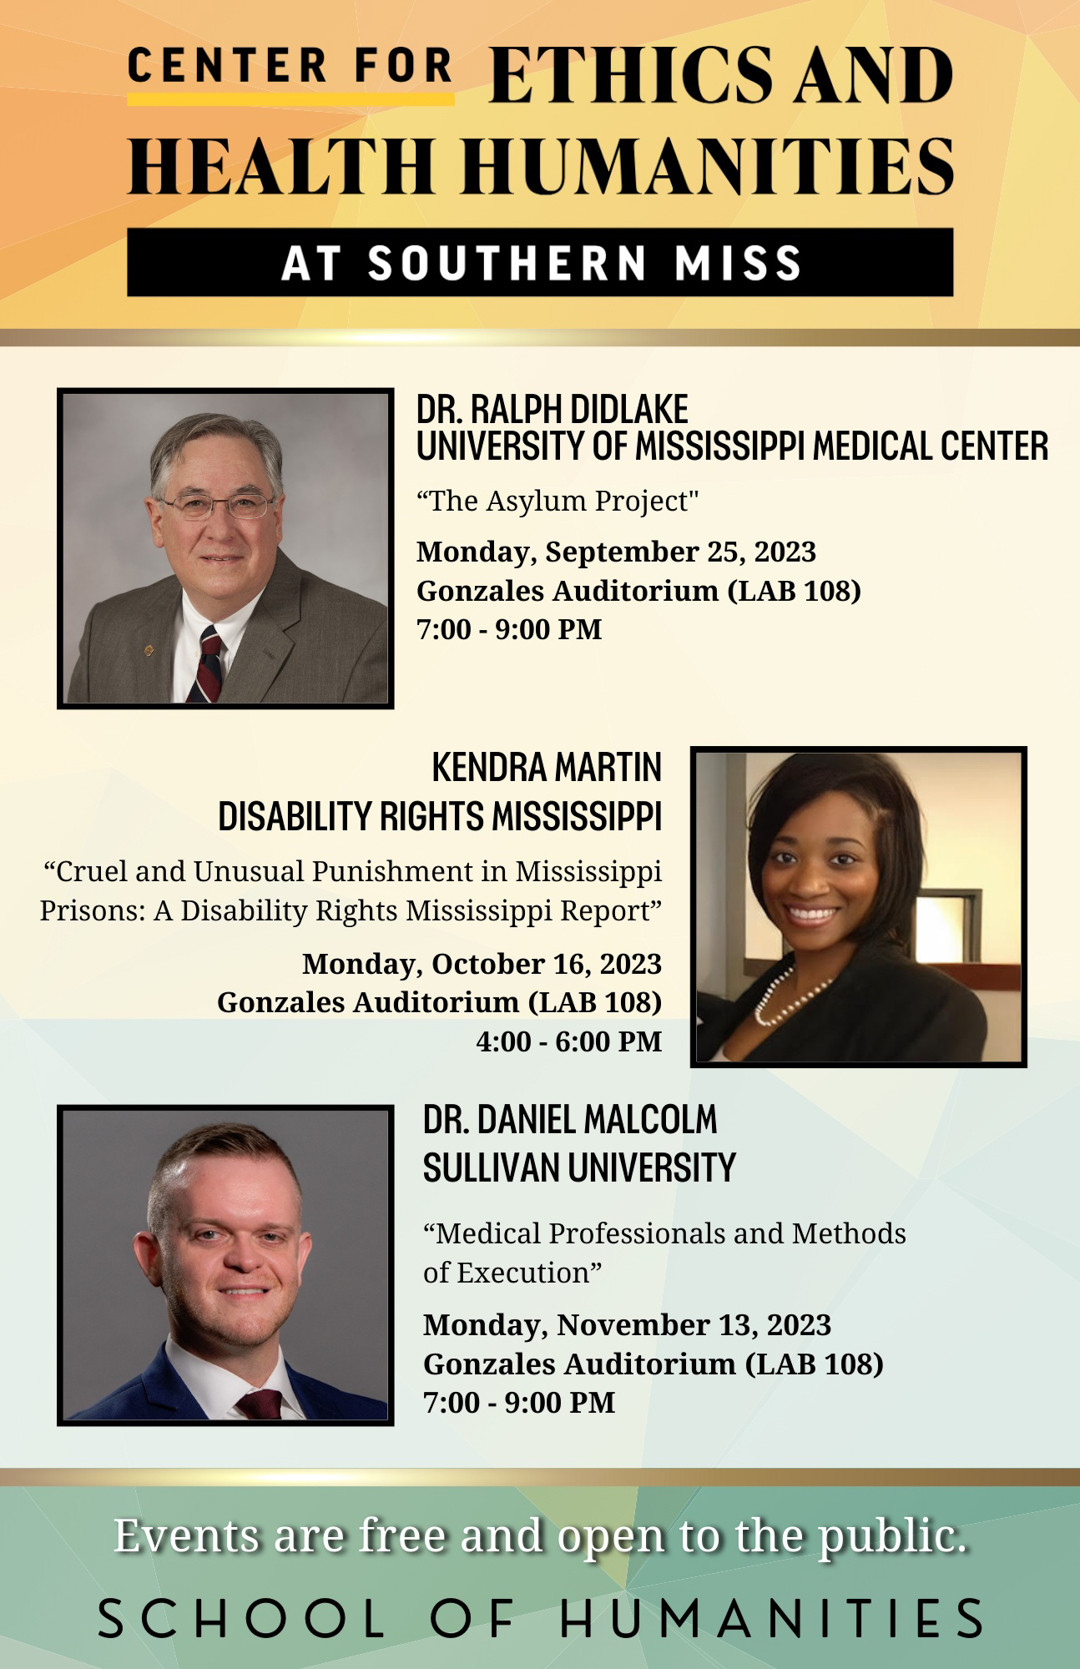 Fall Lecture Series to be Hosted by the Center for Ethics and Health Humanities, Starting from Sept. 25